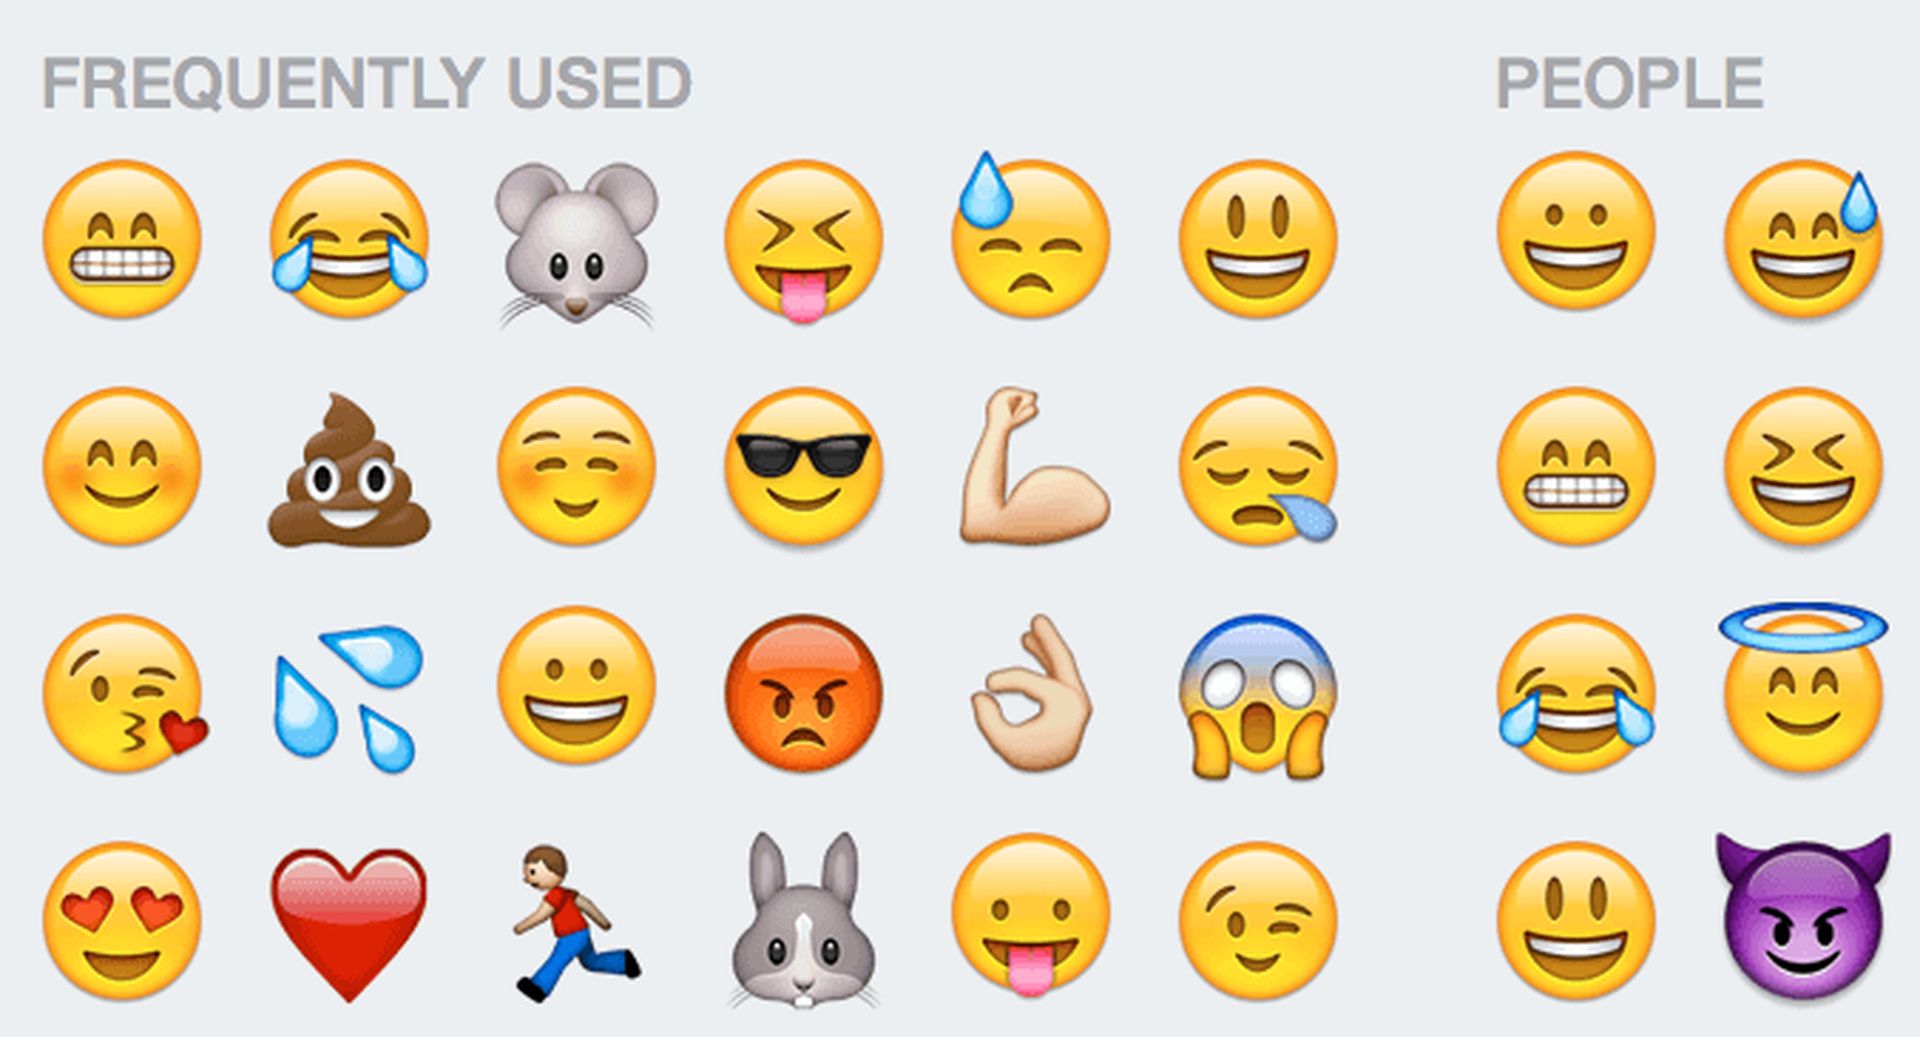 Today, we'll be taking a look at a problem that some users on both iOS and Android are having which makes them ask "Why do my emojis keep resetting?" We are...